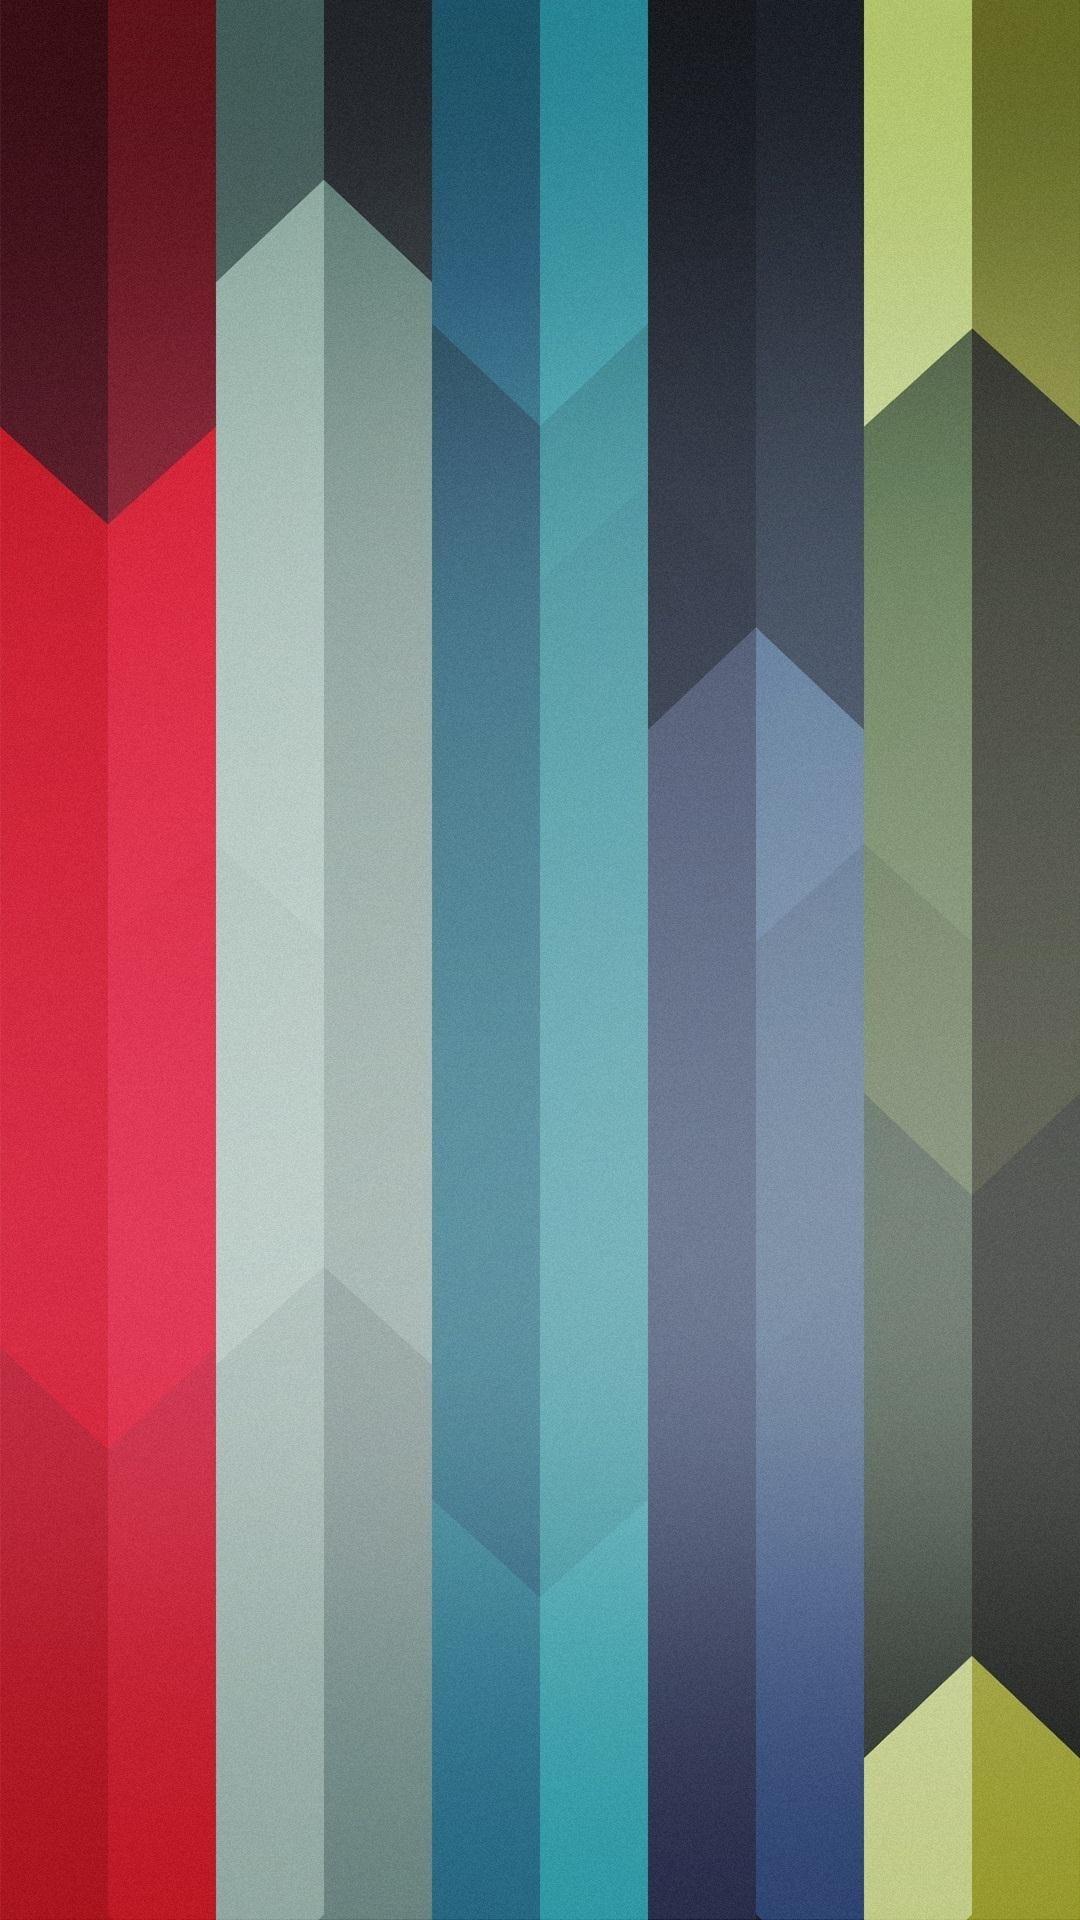 Get the HTC One's New Wallpaper on Any of Your Android Devices Now